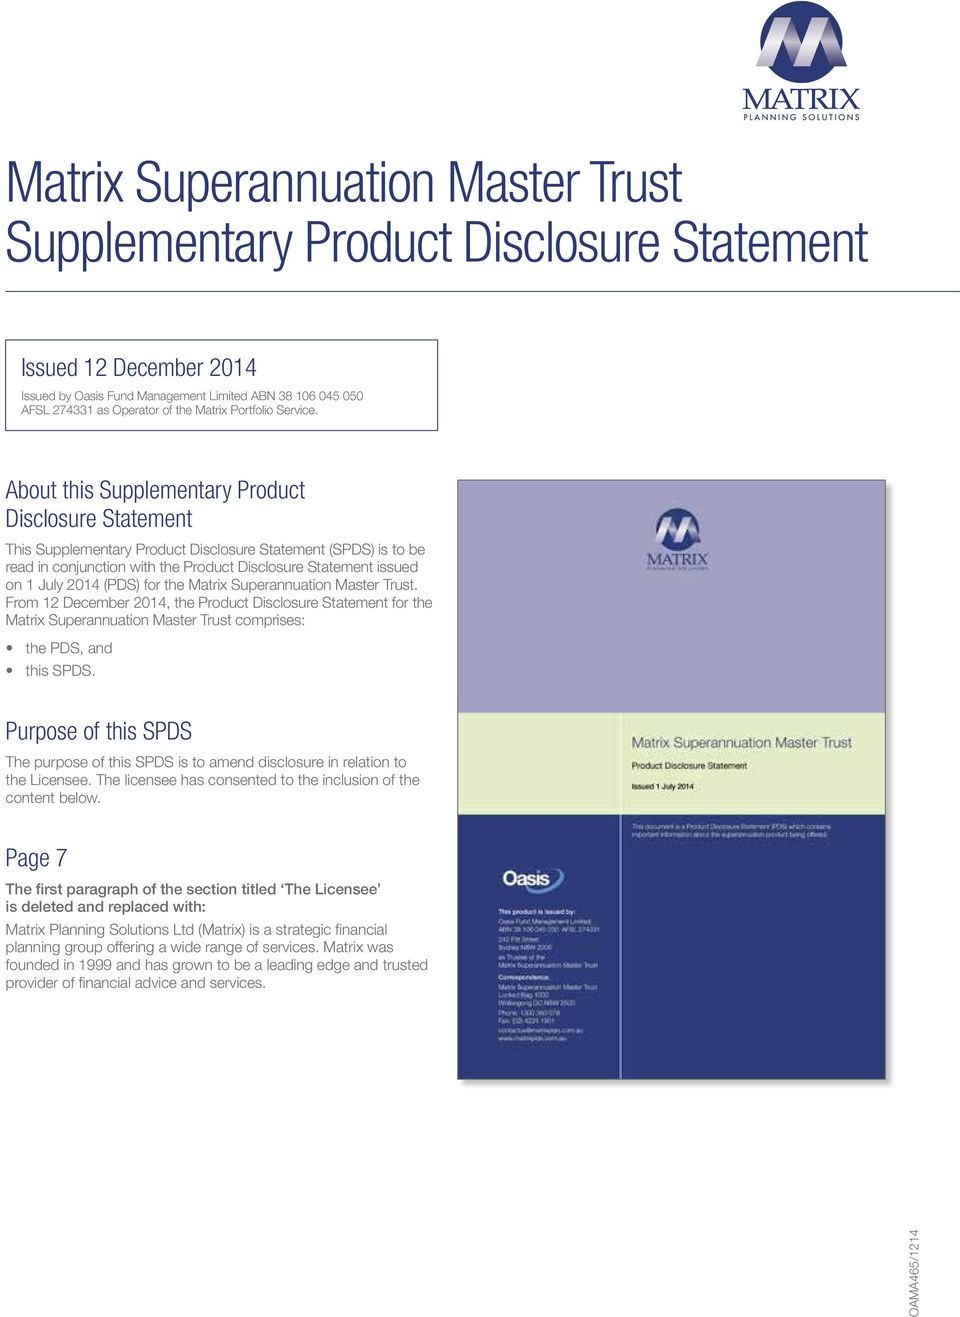 About this Supplementary Product Disclosure Statement This Supplementary Product Disclosure Statement (SPDS) is to be read in conjunction with the Product Disclosure Statement issued on 1 July 2014